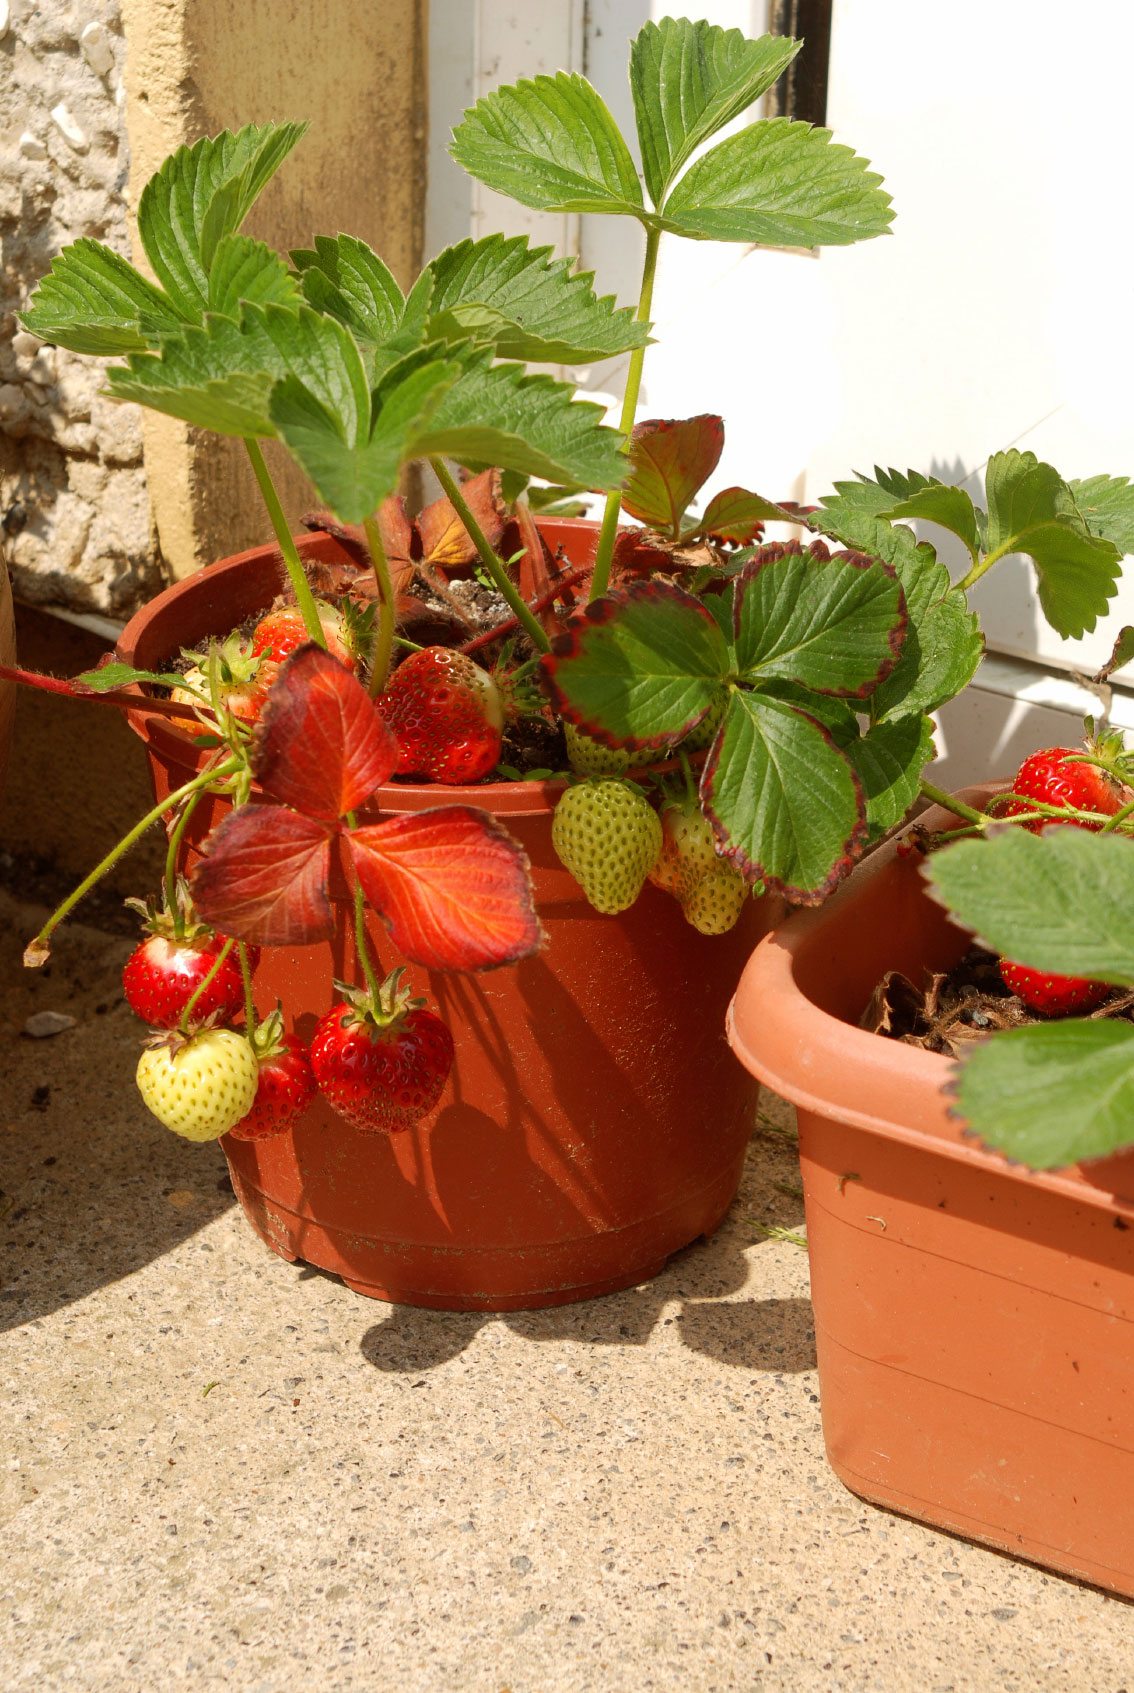 How To Grow Strawberries In Containers